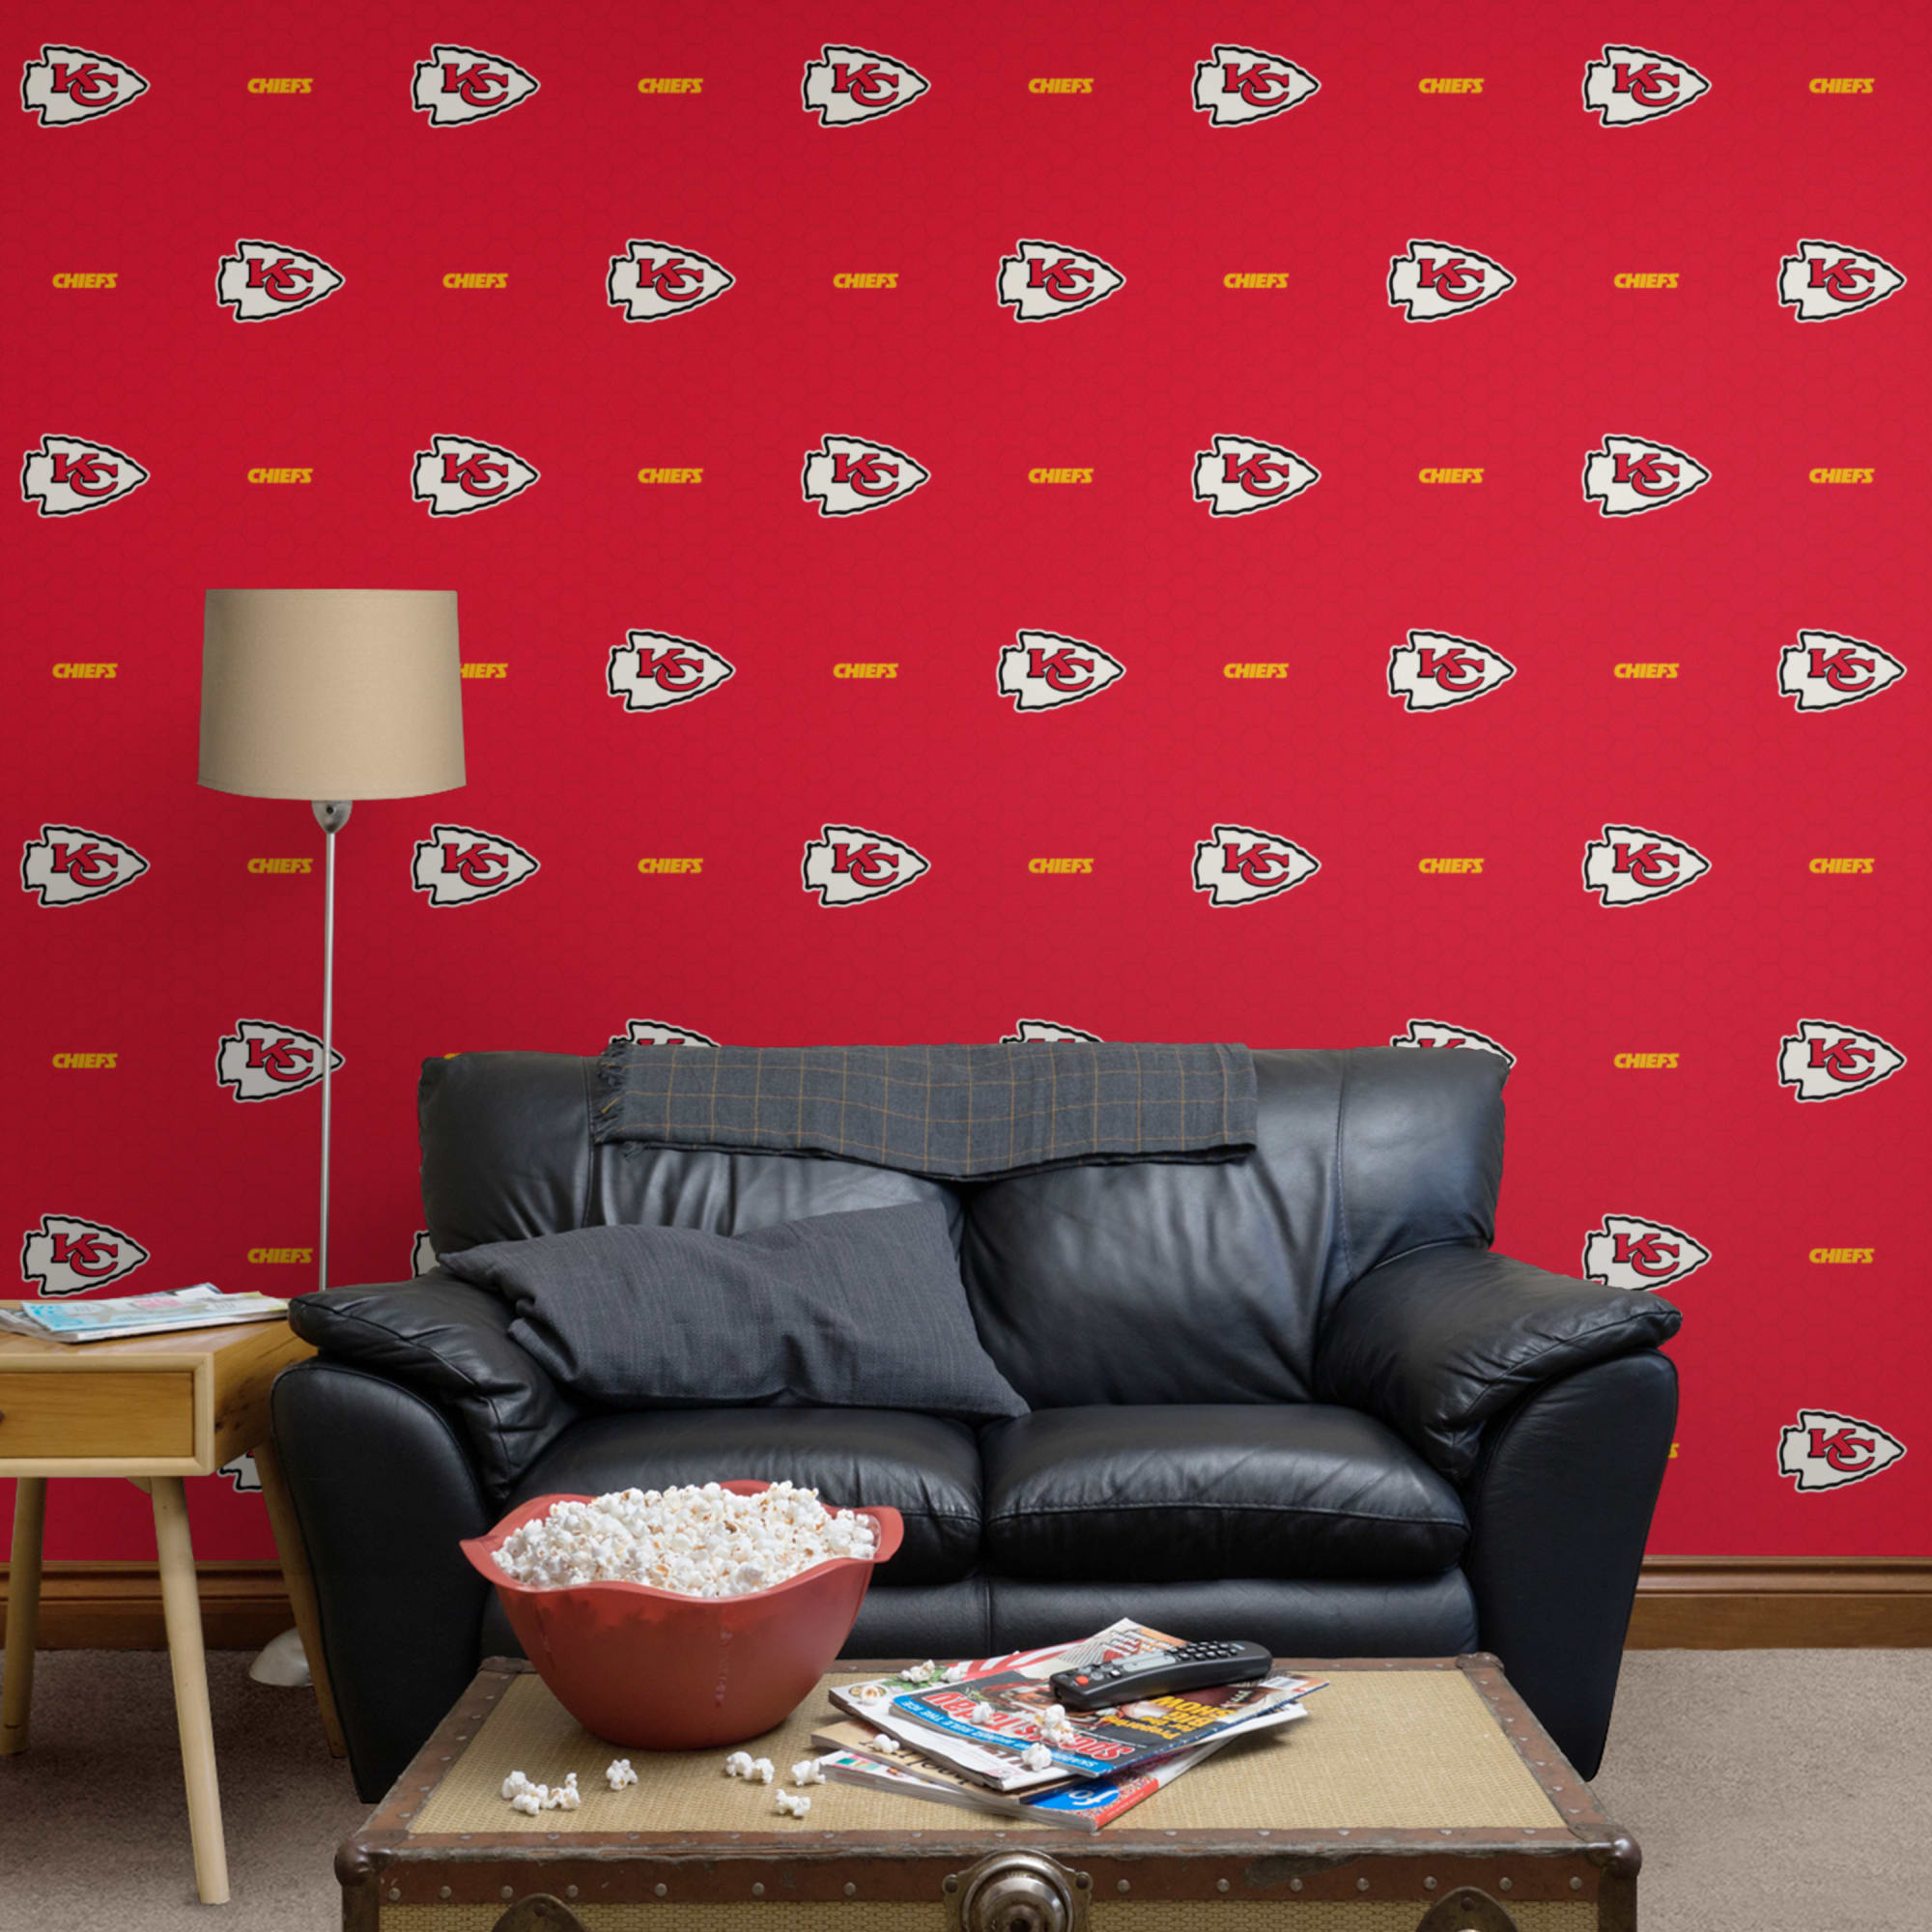 Kansas City Chiefs: Logo Pattern - Officially Licensed NFL Removable Wallpaper 12" x 12" Sample by Fathead | 100% Vinyl